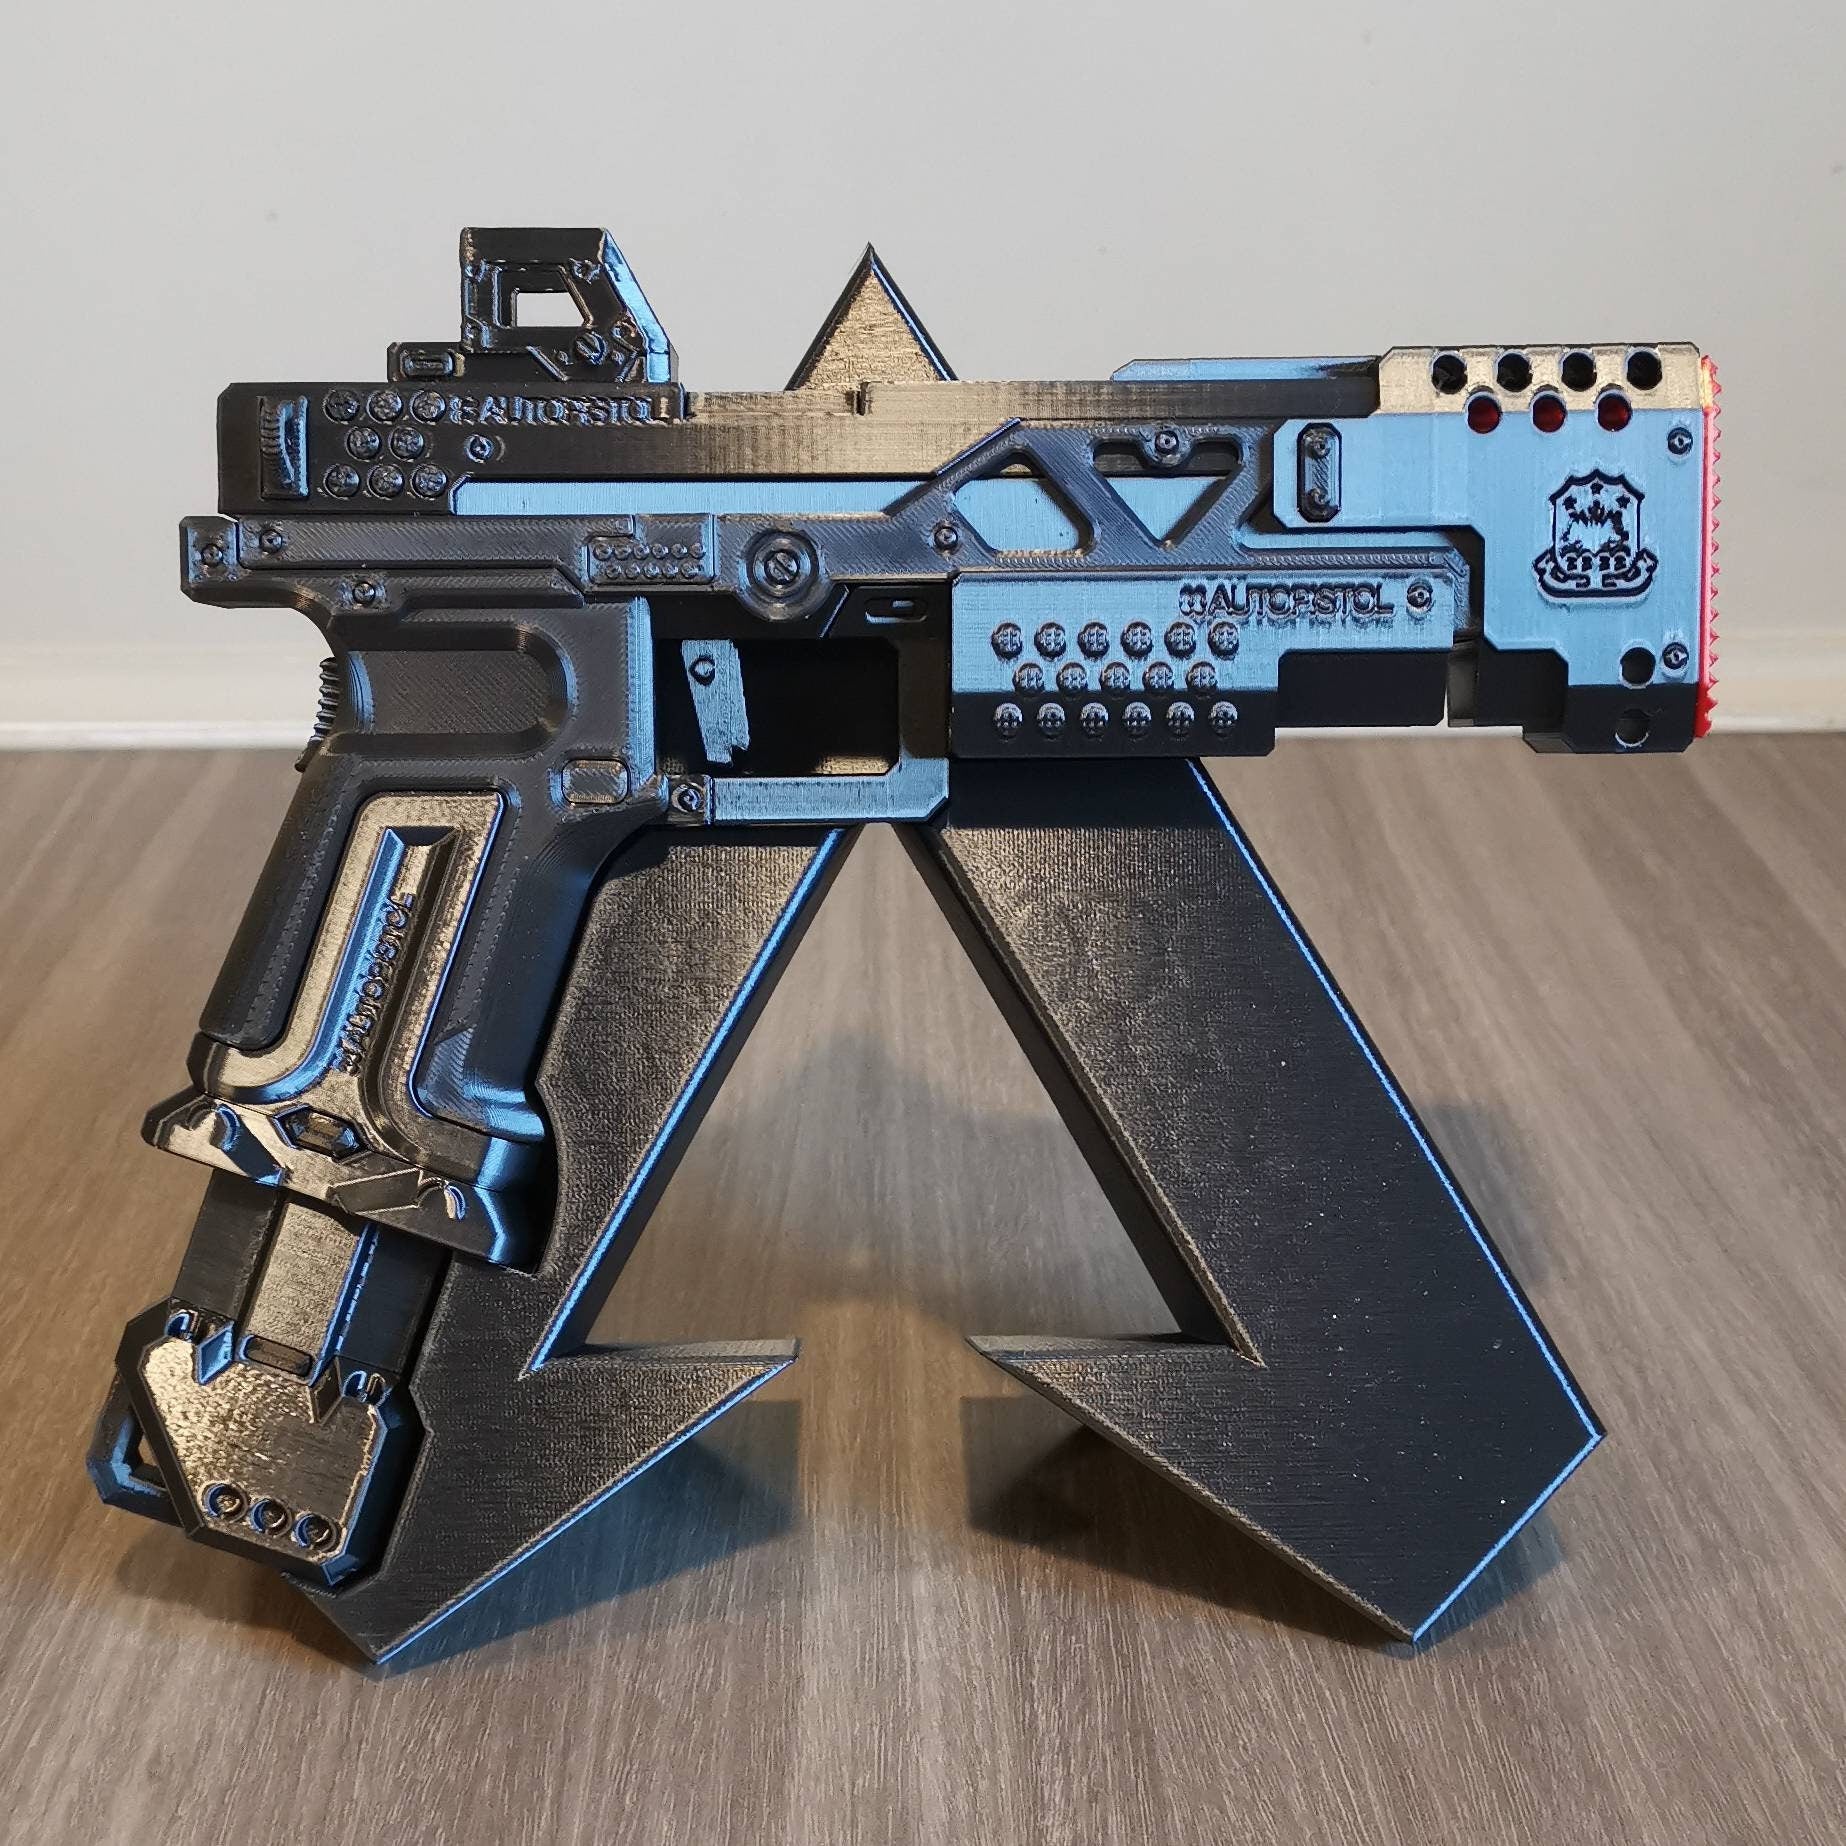 Apex Legends RE-45 Cosplay Replica With Stand, Wingman replica, Post Apocalyptic Larp Weapon, Cyberpunk Cosplay Prop Weapon